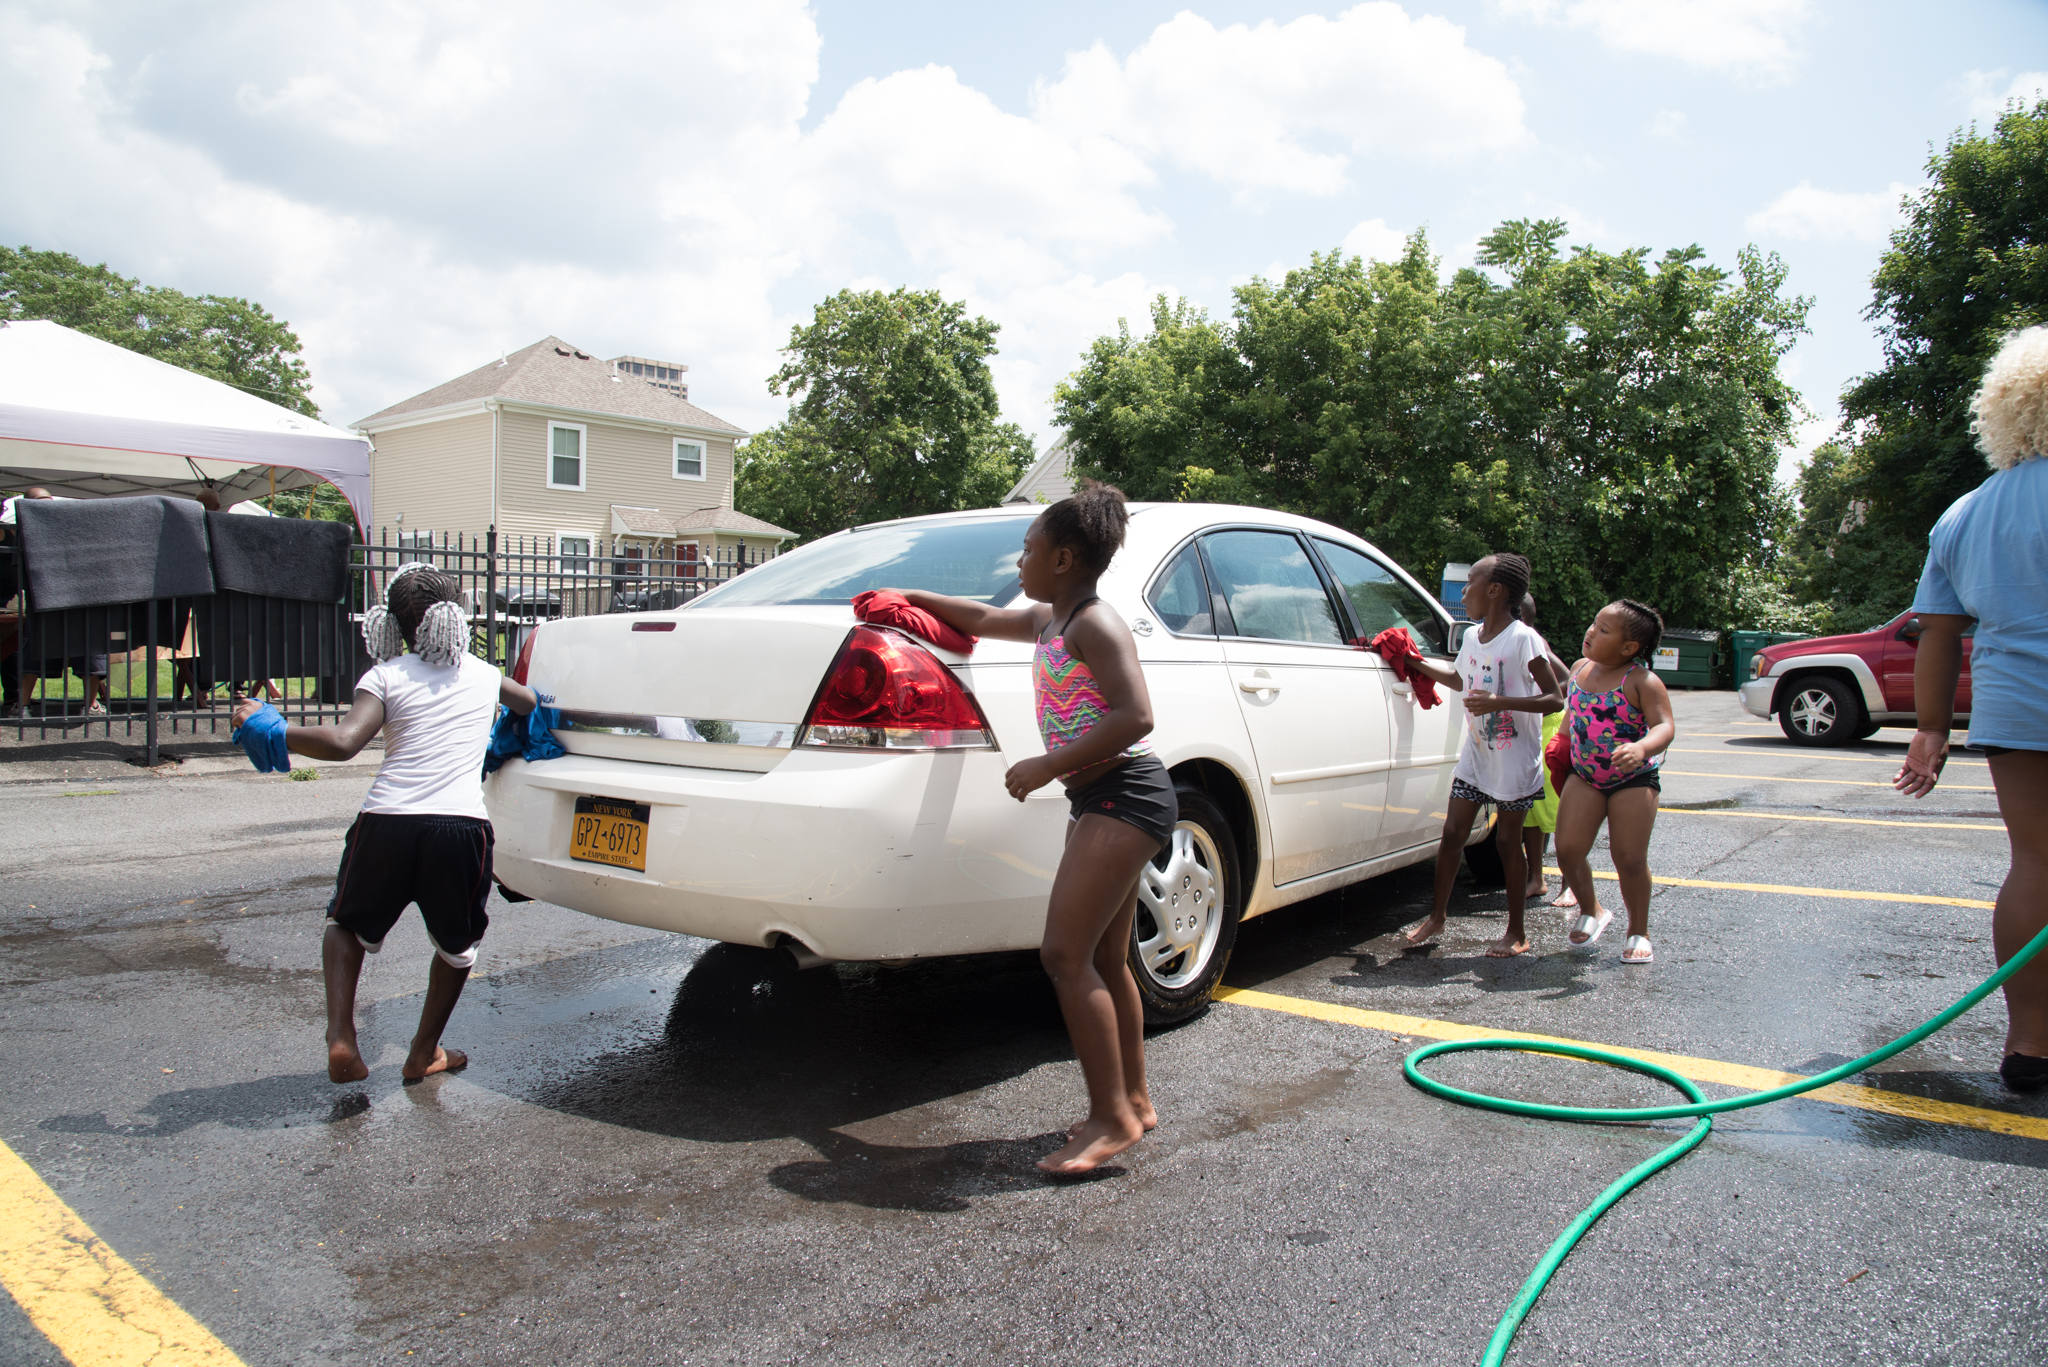 Youth at the Central Village Boys & Girls Club wash cars July 22. | Photo by Marianne Barthelemy